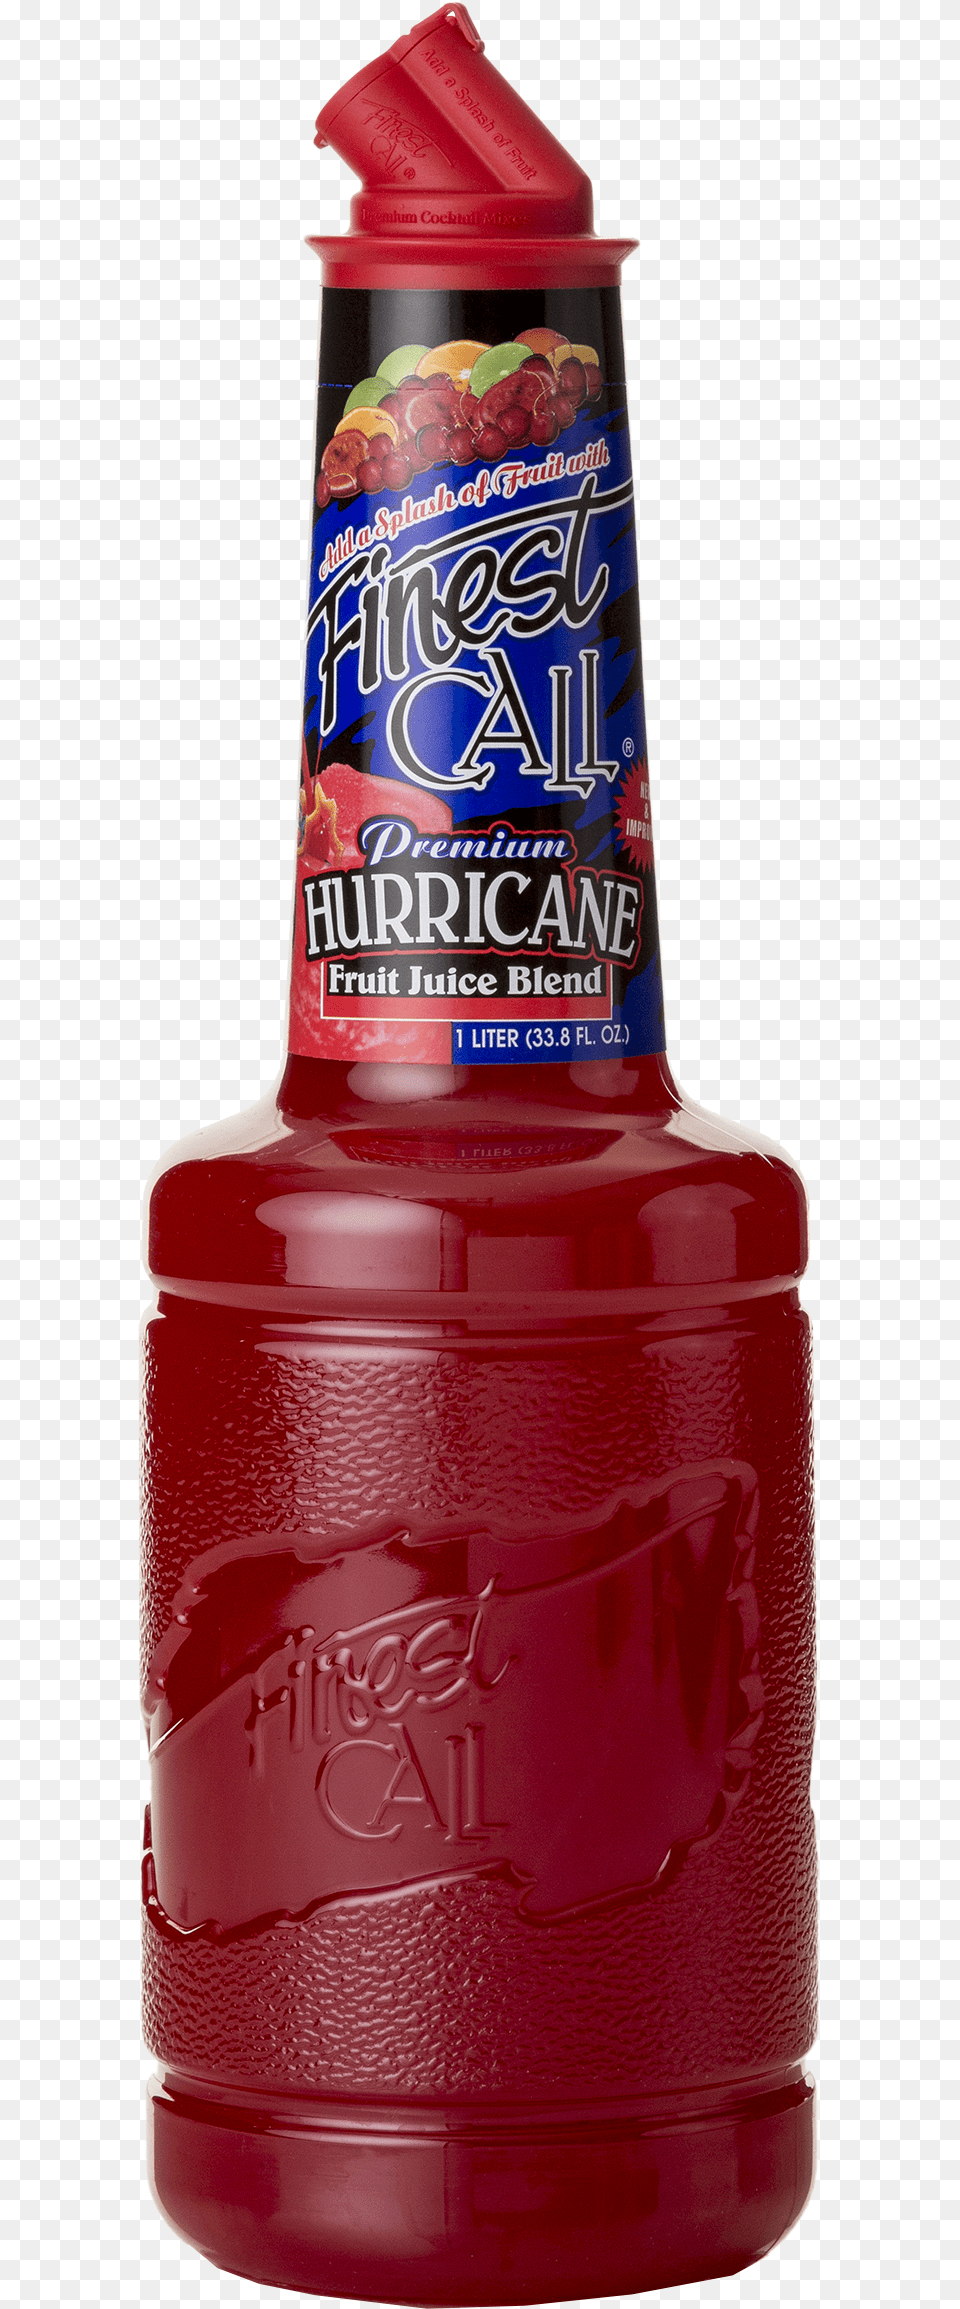 Finest Call Hurricane Mix, Bottle, Food, Ketchup, Alcohol Png Image